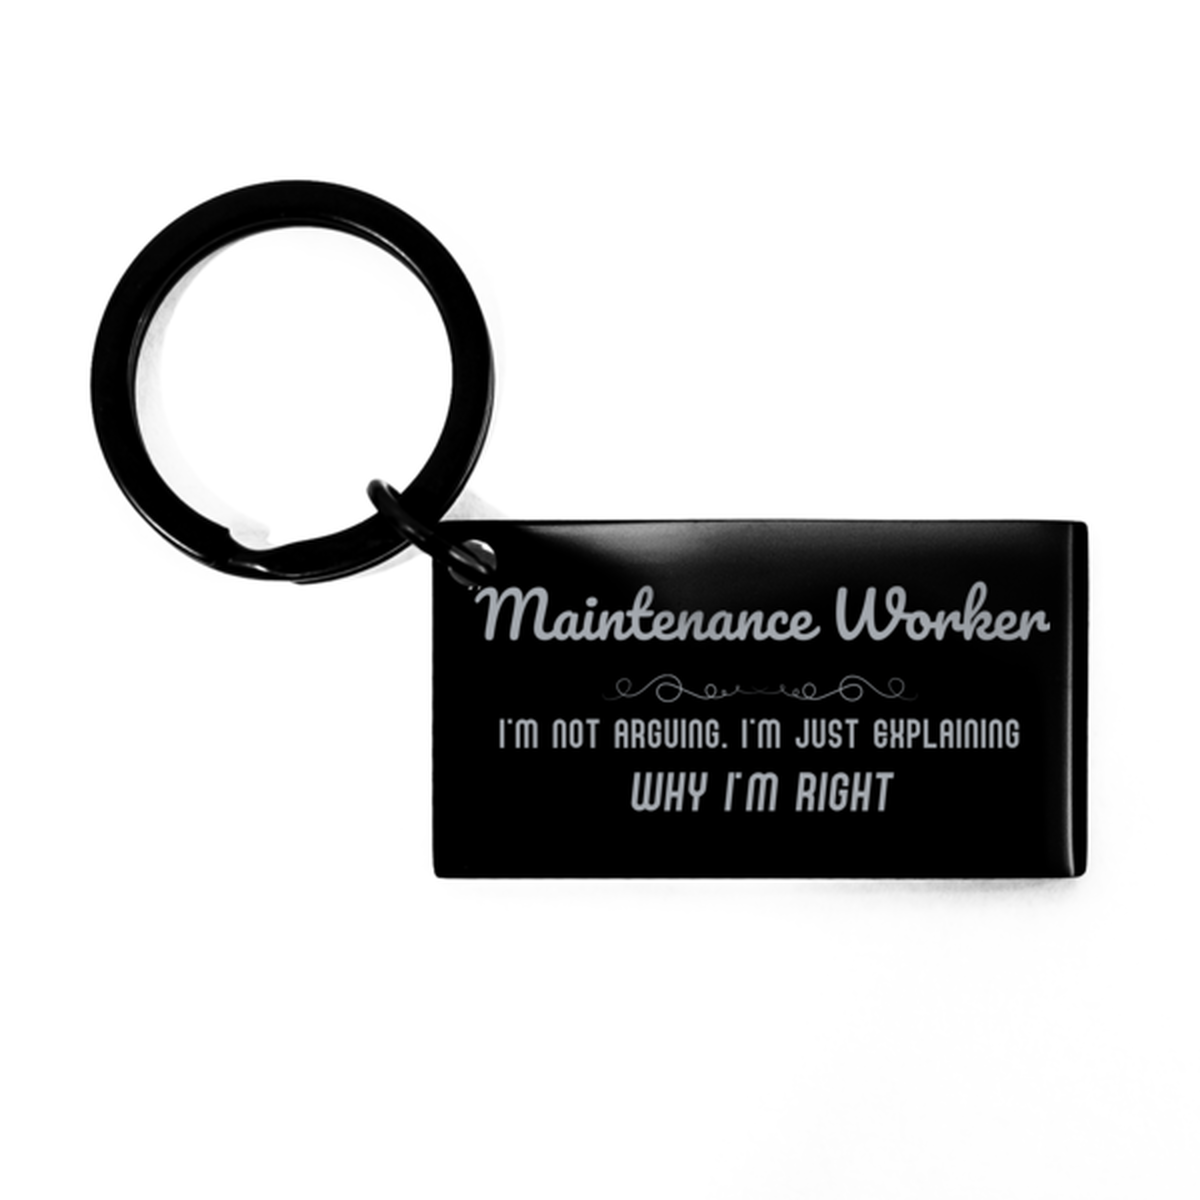 Maintenance Worker I'm not Arguing. I'm Just Explaining Why I'm RIGHT Keychain, Funny Saying Quote Maintenance Worker Gifts For Maintenance Worker Graduation Birthday Christmas Gifts for Men Women Coworker